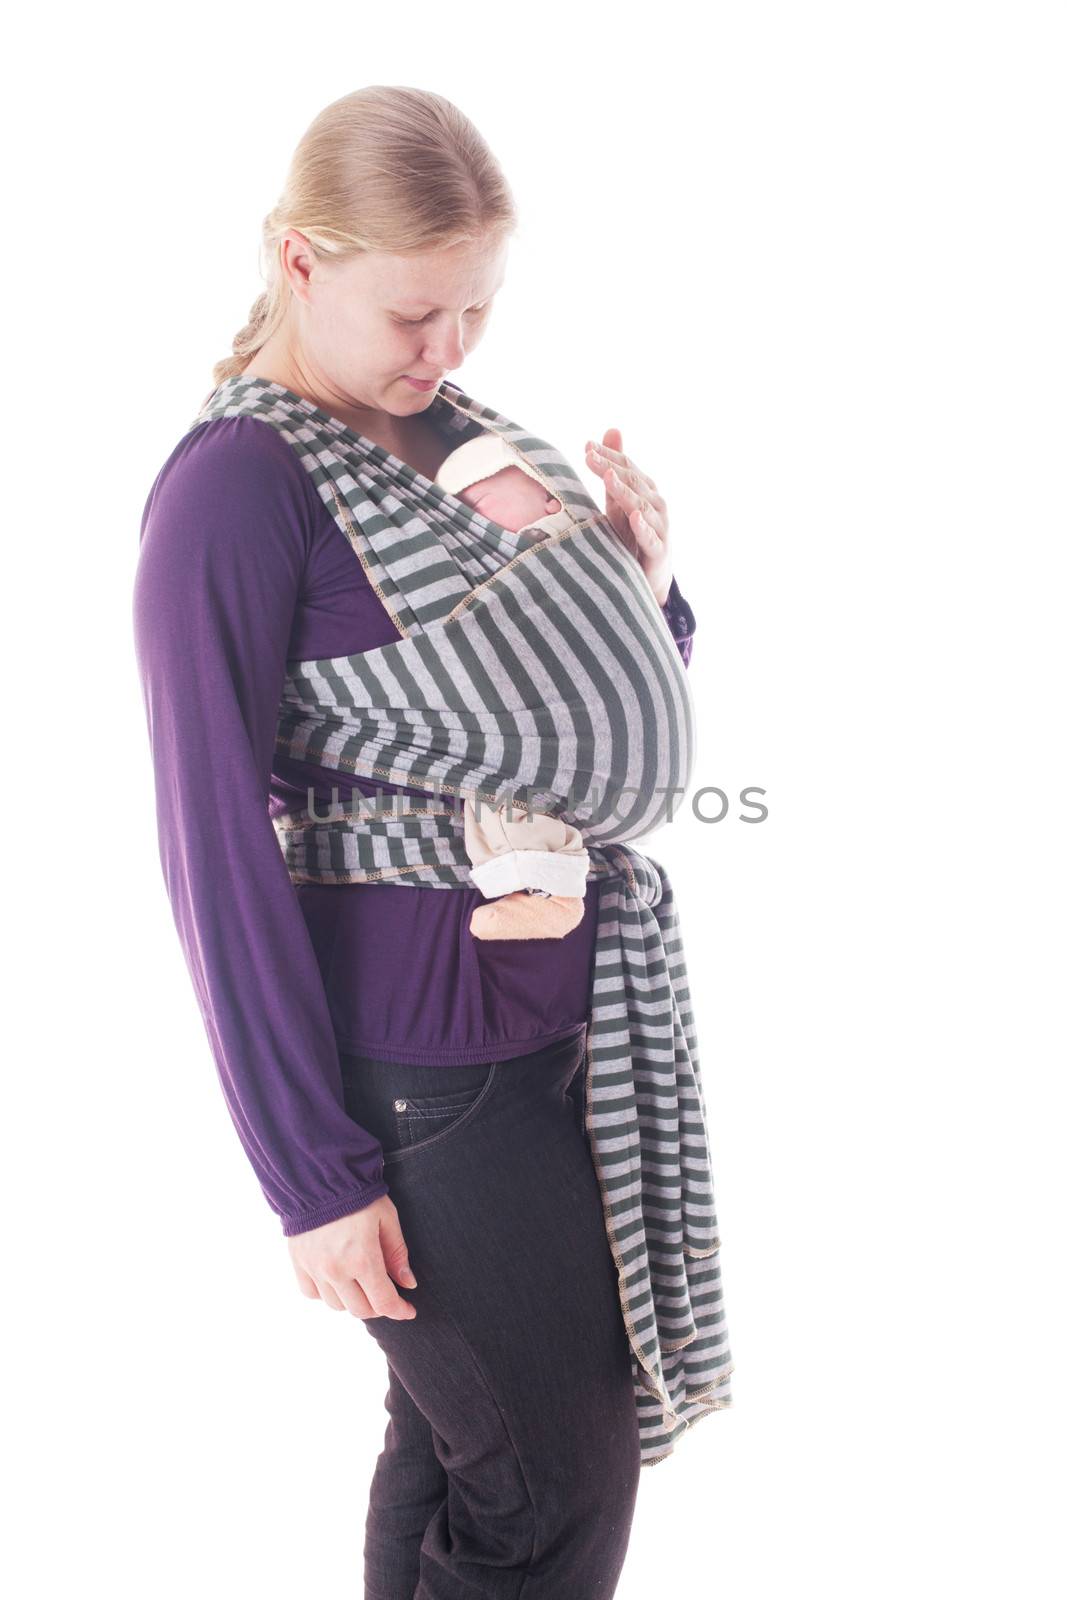 Mother with newborn baby in sling isolated on white